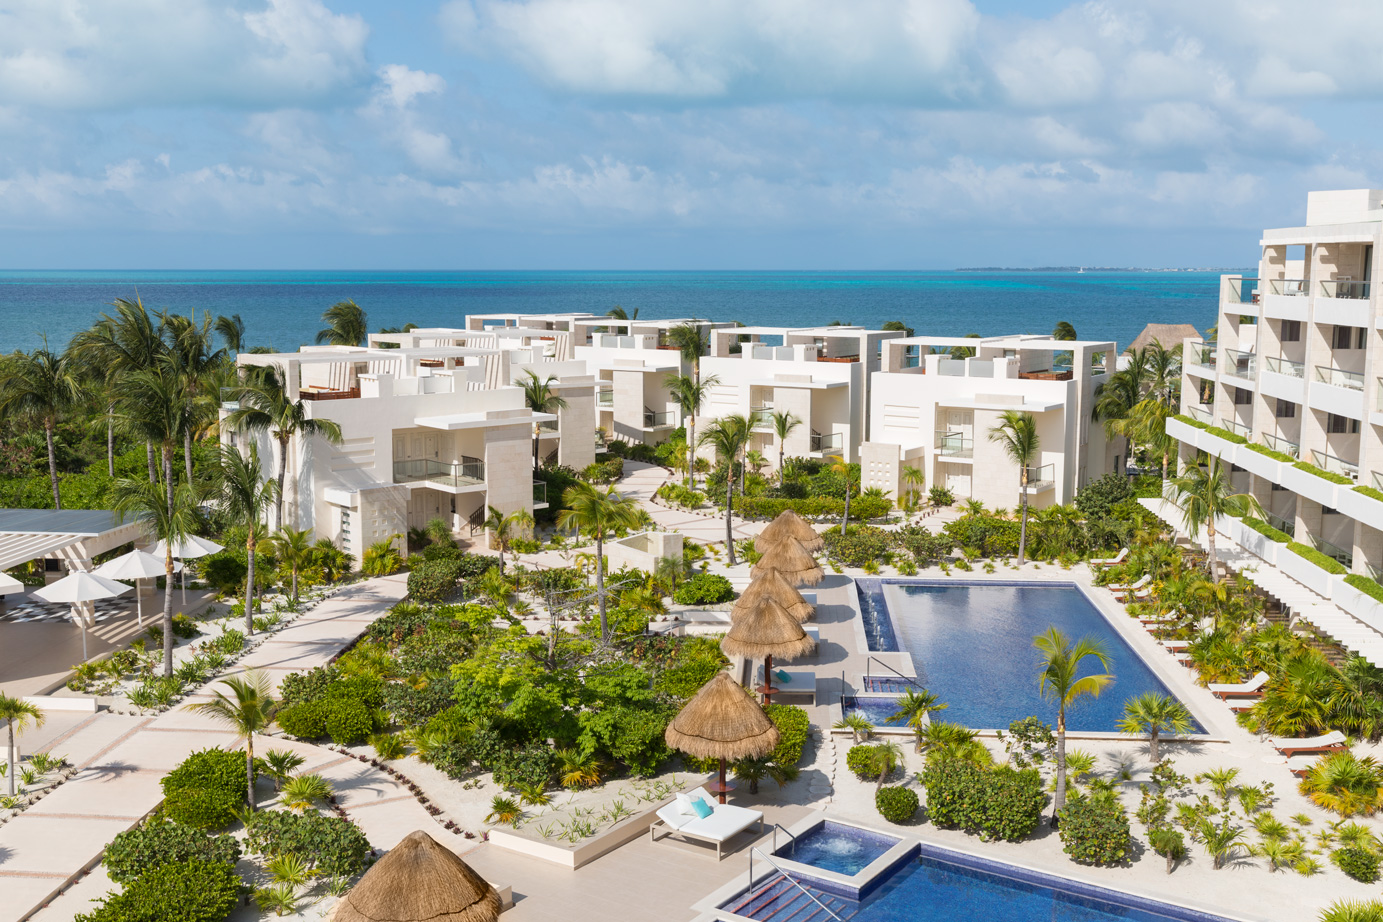 One of the best resorts in Mexico is in Playa Mujeres